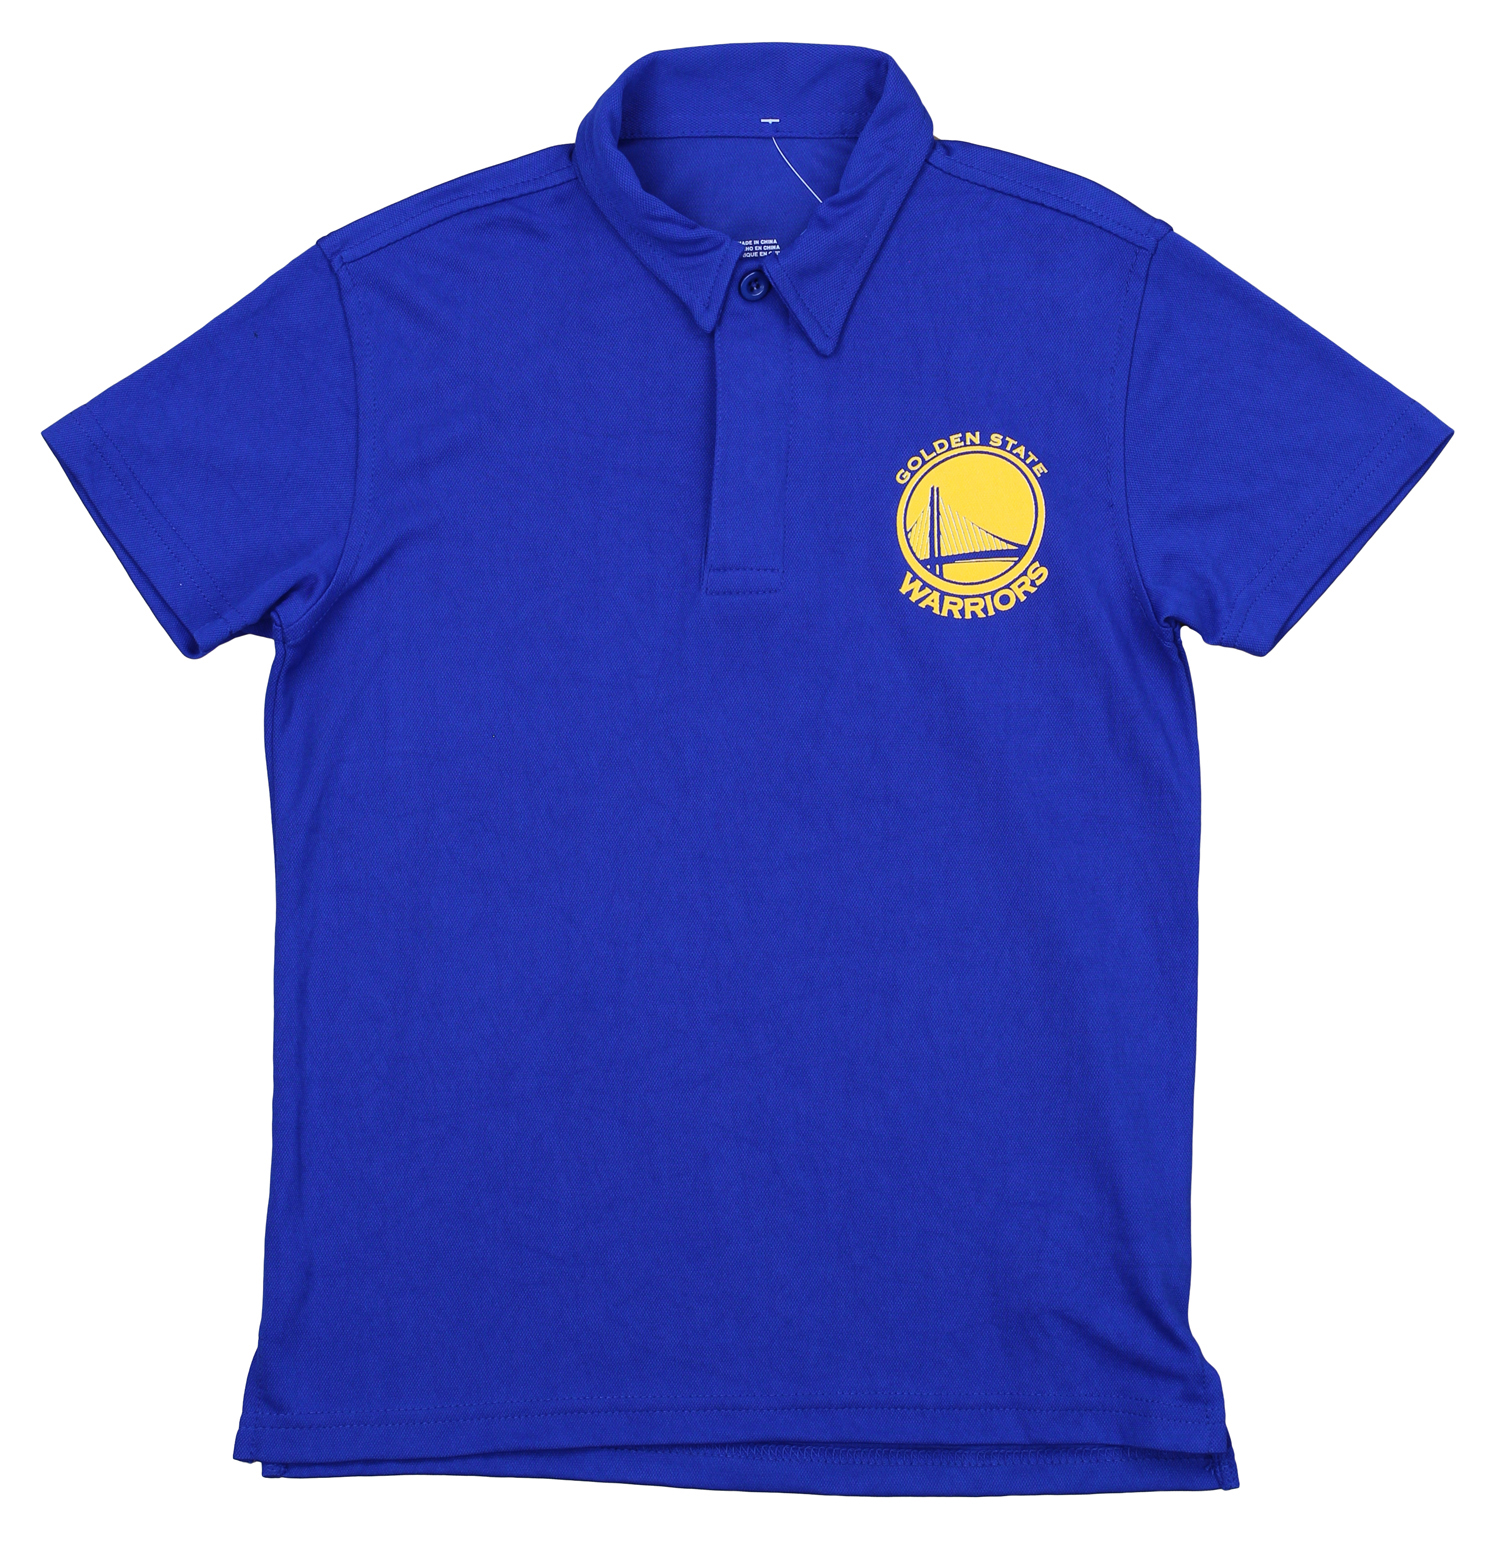 NBA Youth Golden State Warriors Performance Polo | eBay